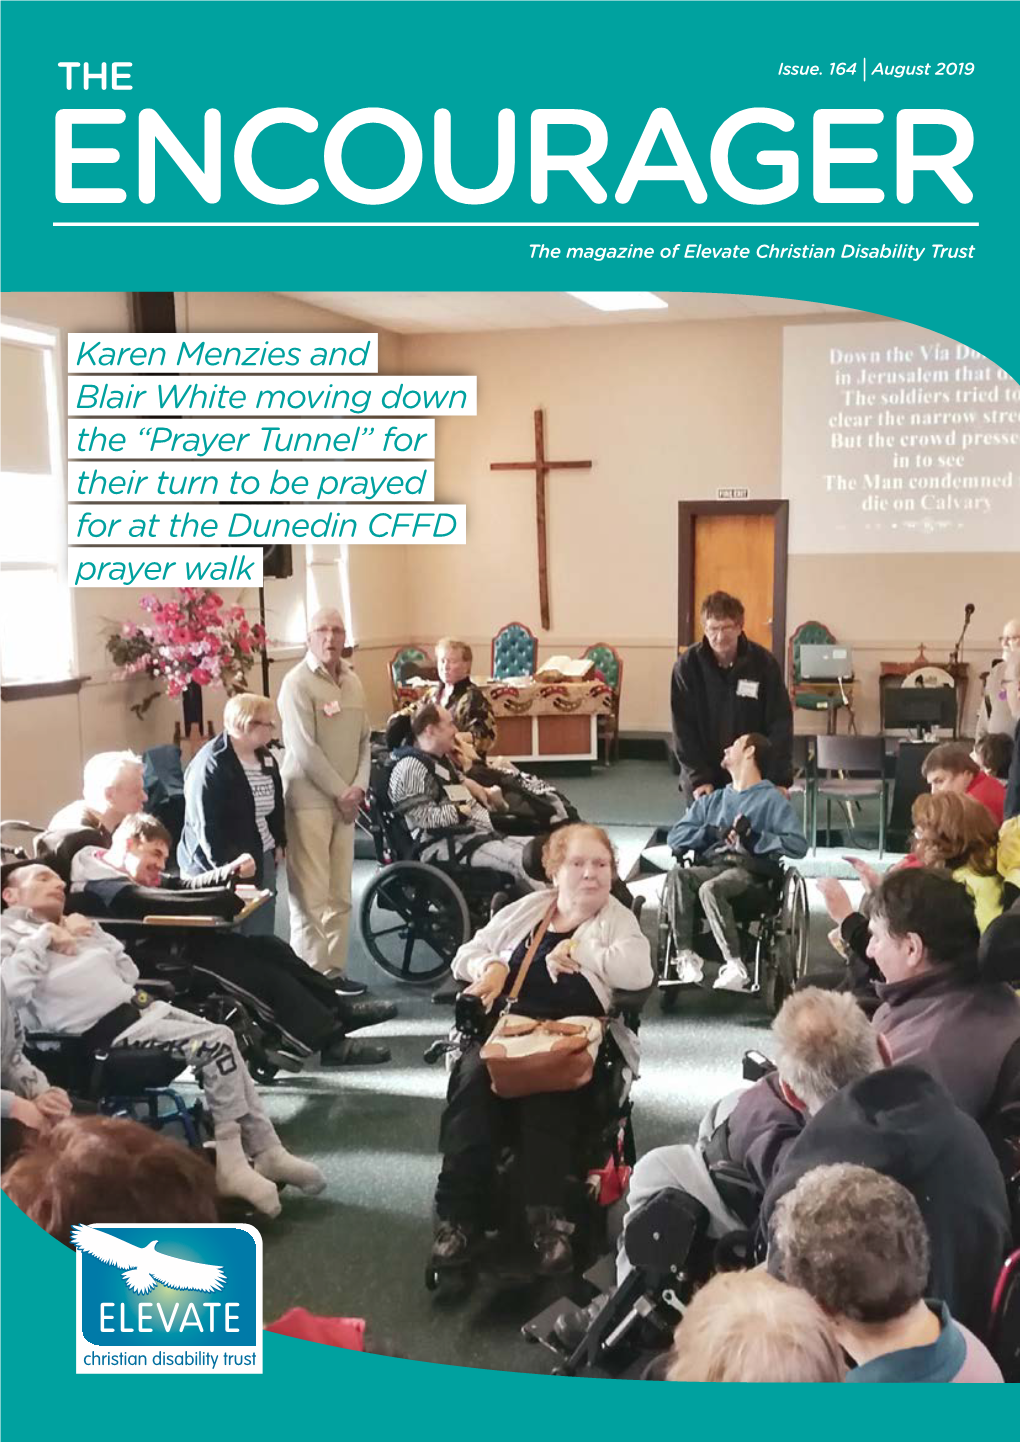 The Encourager Magazine No. 164, August 2019